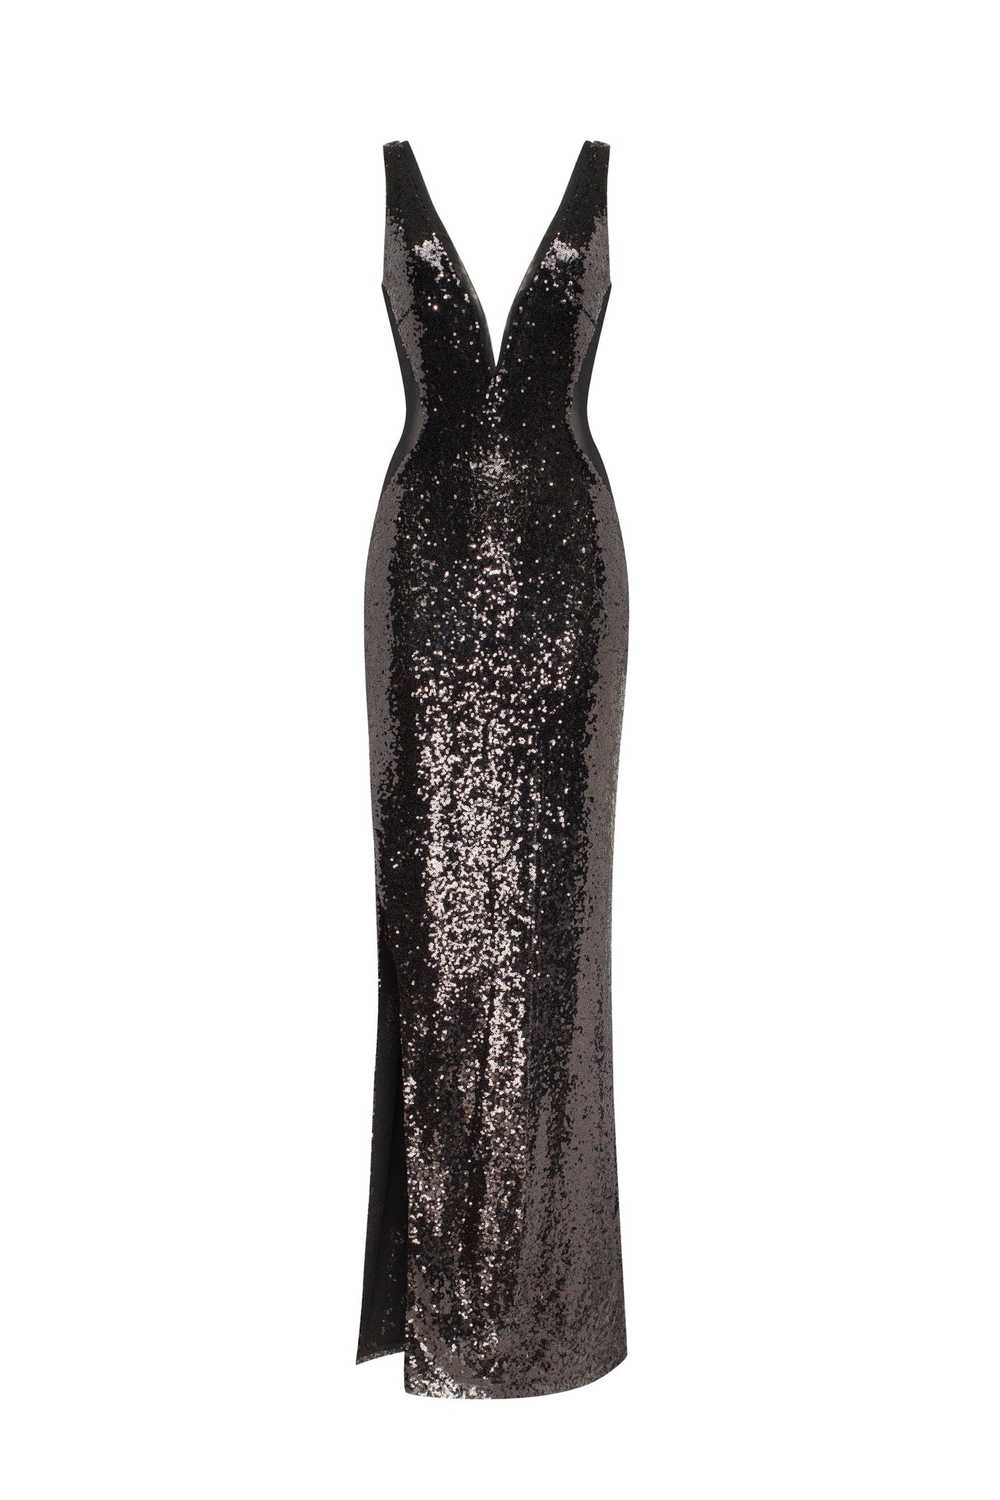 Milla Dazzling fully sequined black maxi dress, S… - image 1